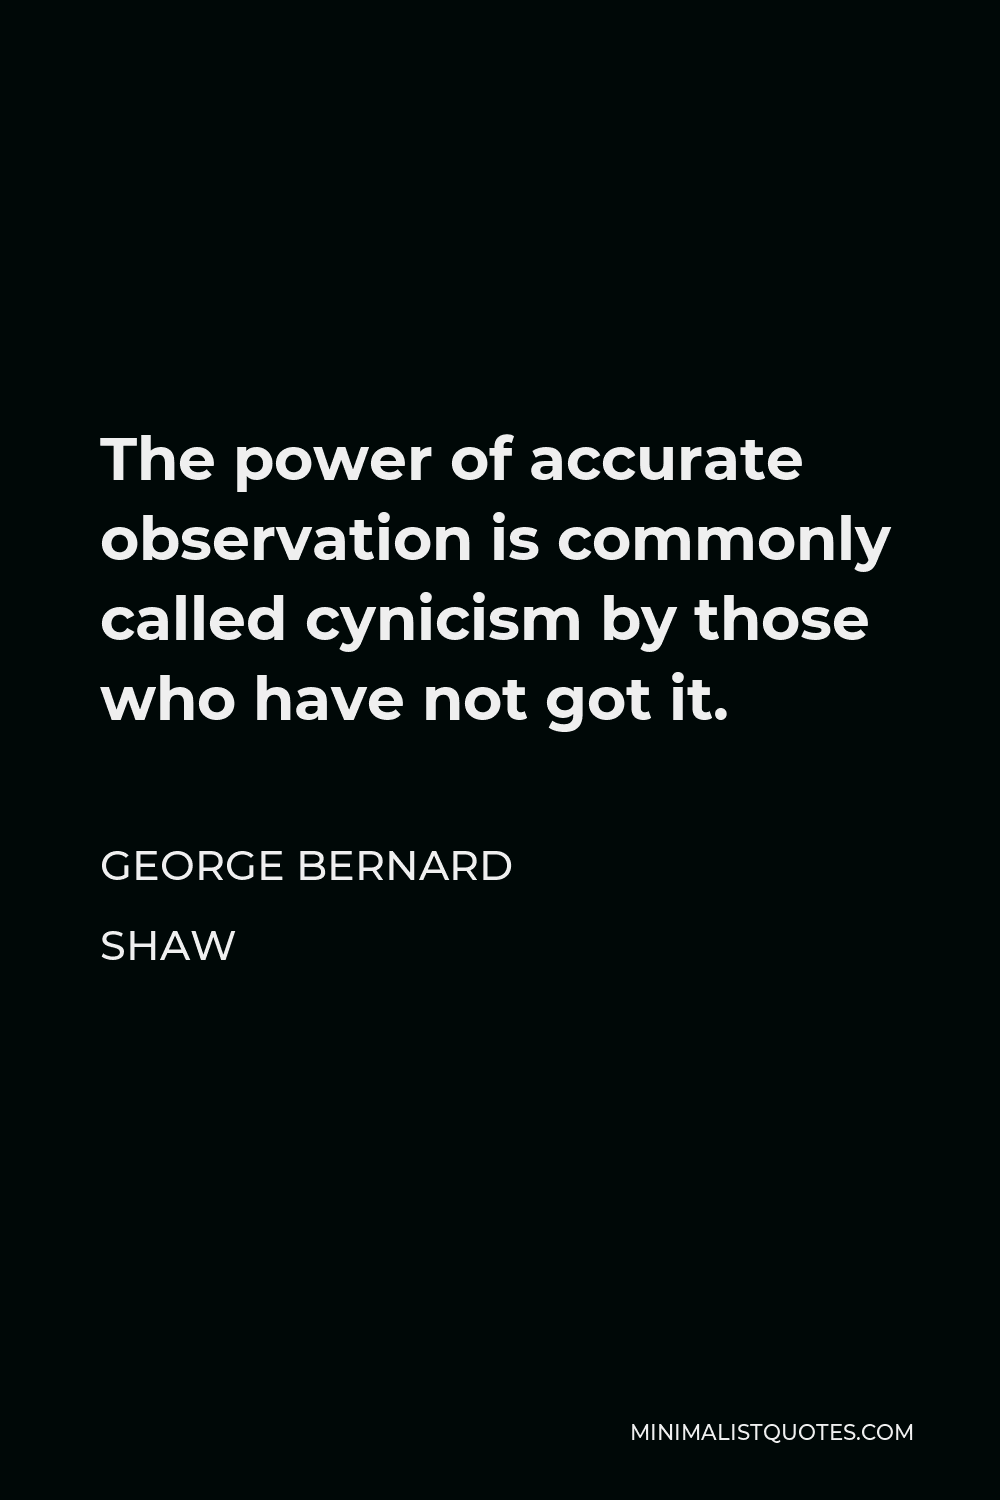 George Bernard Shaw Quote - The power of accurate observation is commonly called cynicism by those who have not got it.